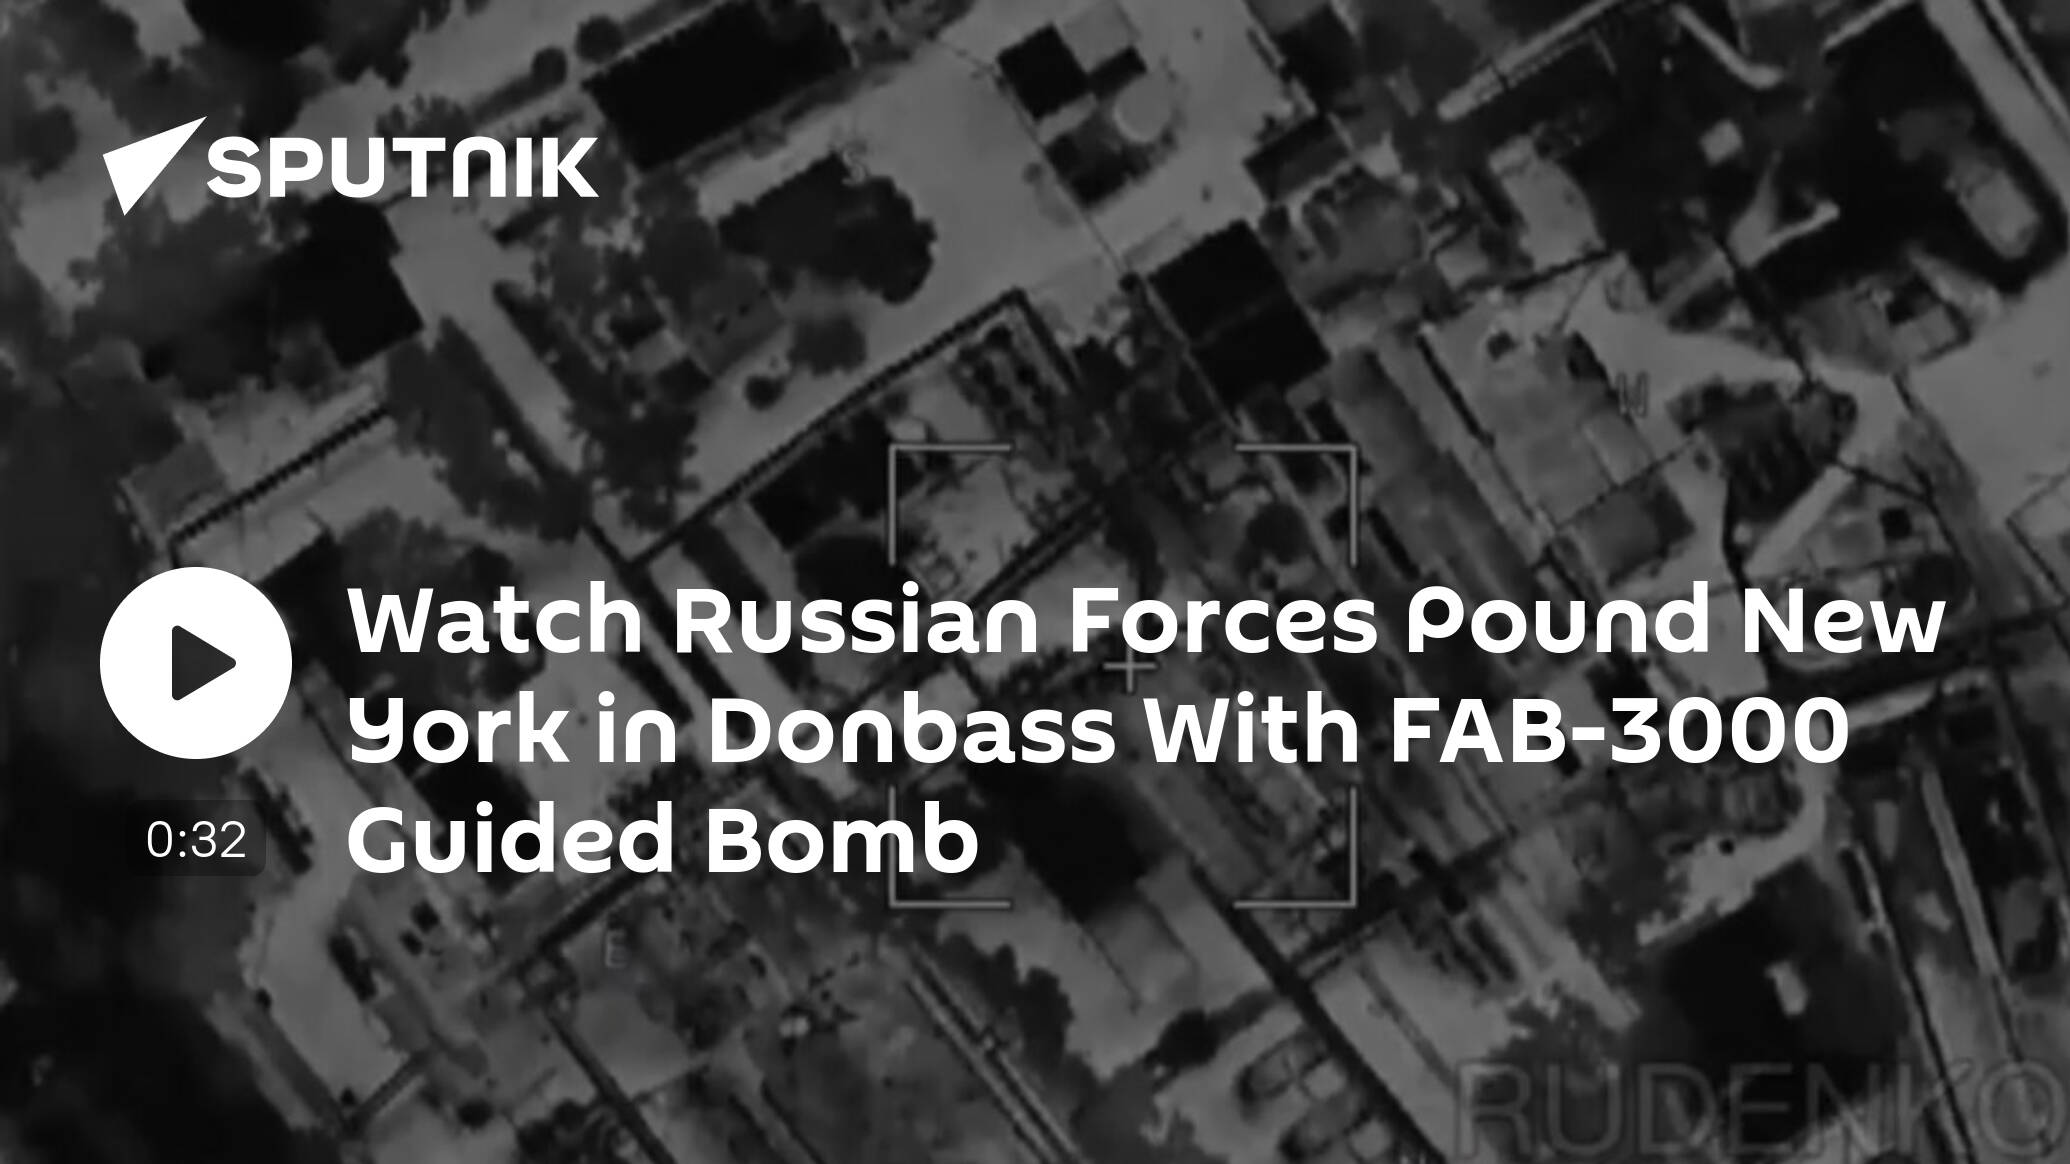 Watch Russian Forces Pound New York With FAB-3000 Guided Bomb [Video]